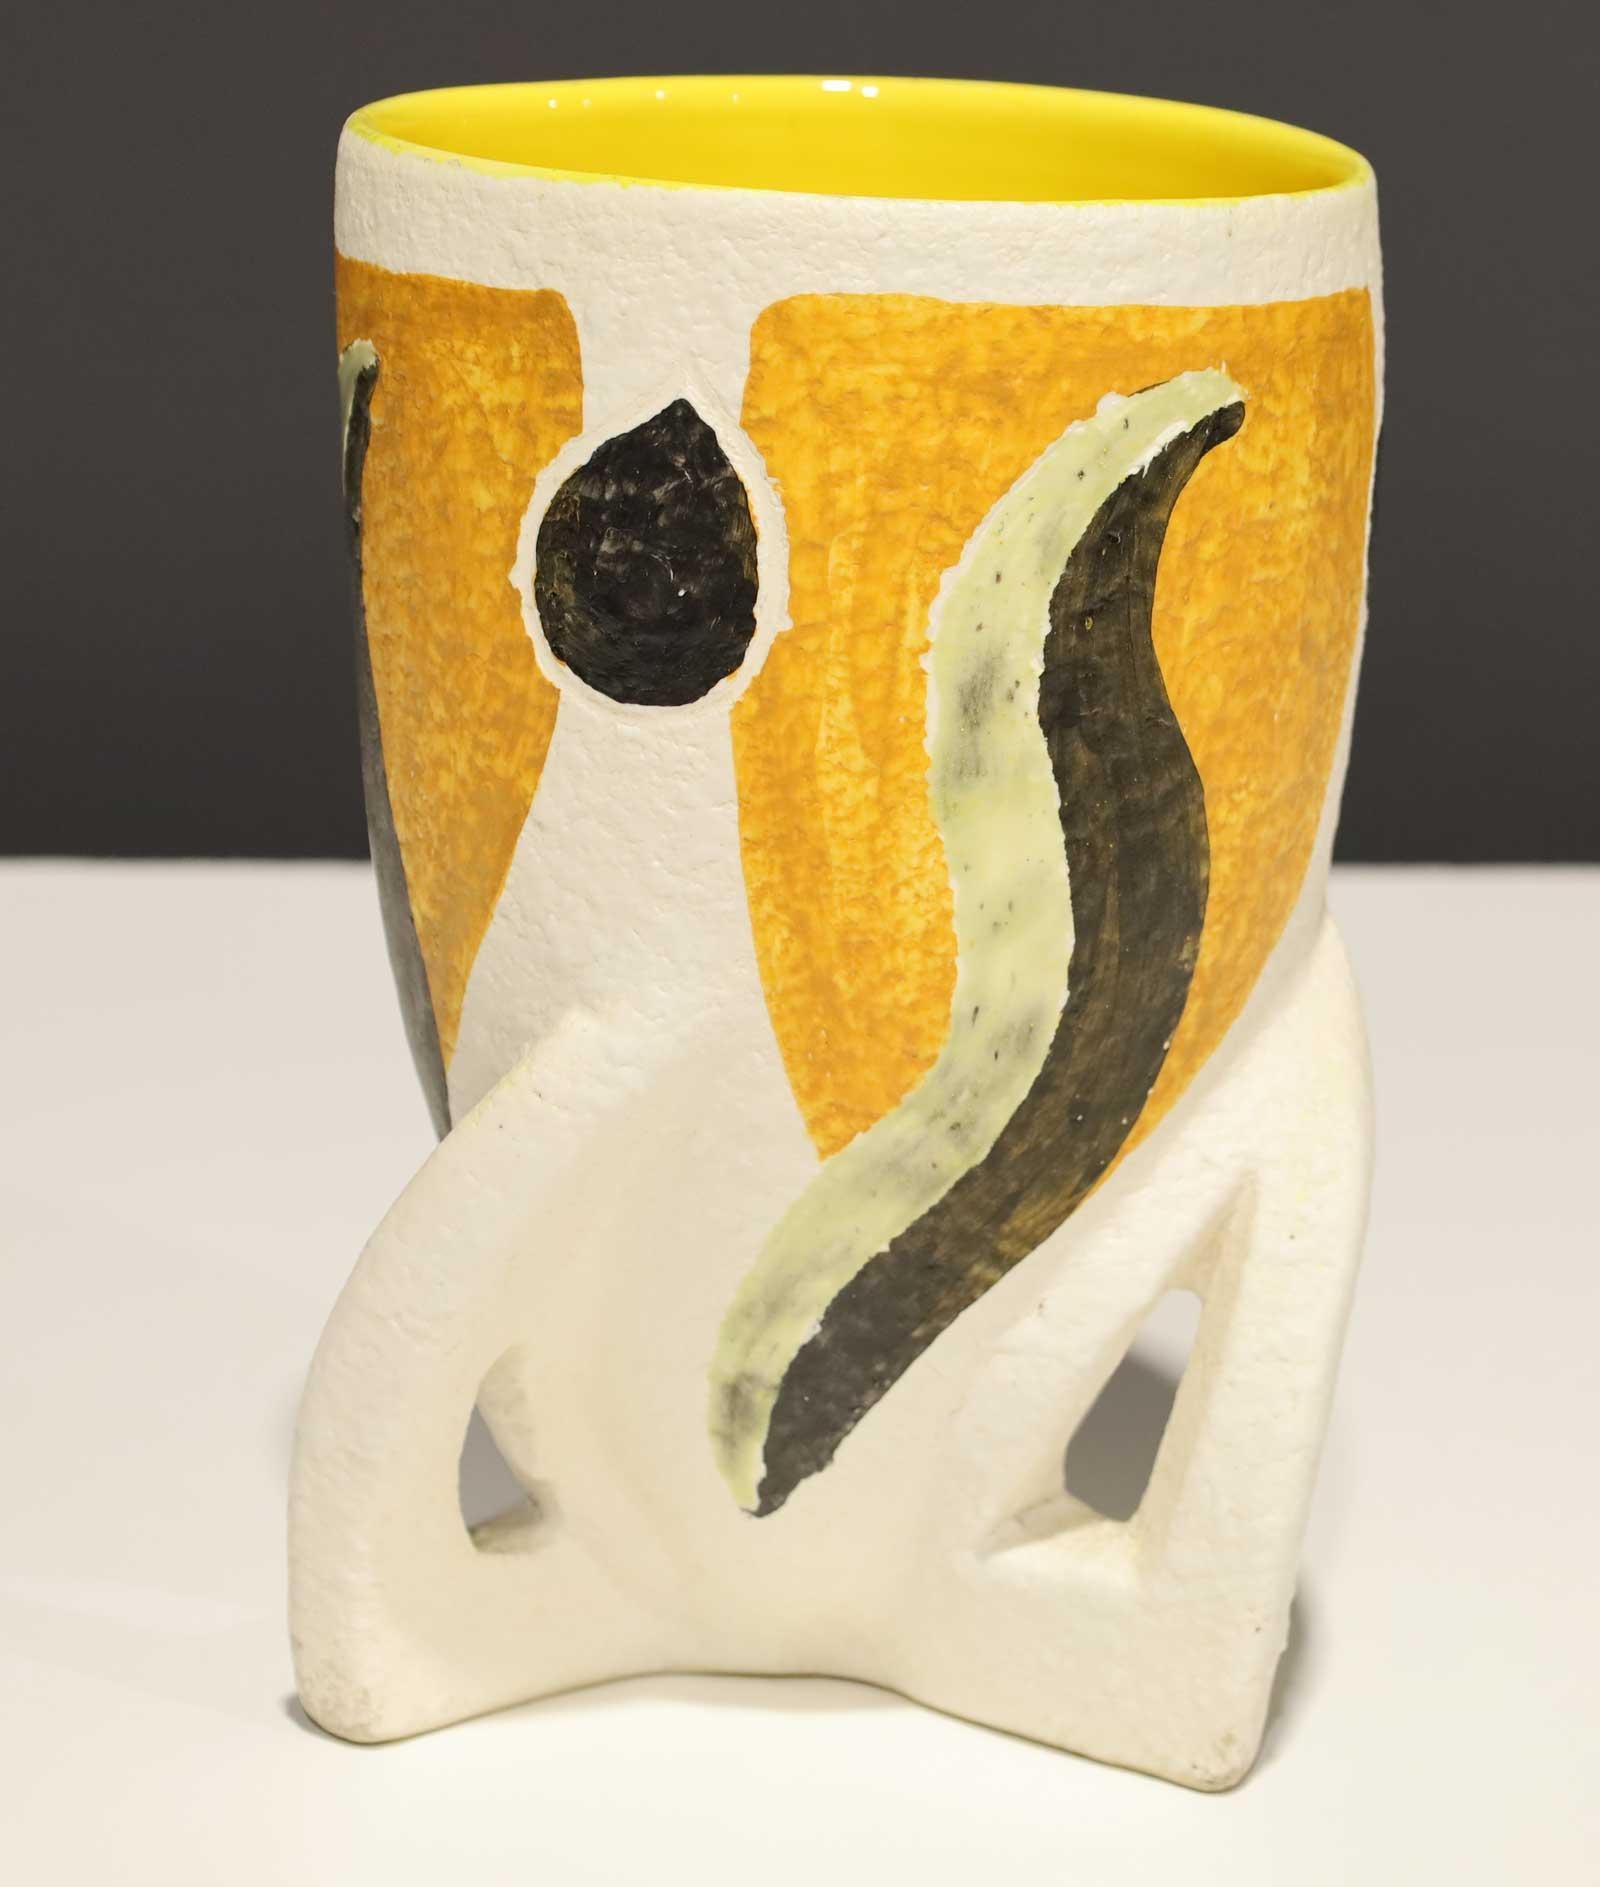 Giacomo Balla Attributed Vase in Yellow, Black and White In Good Condition For Sale In Dallas, TX